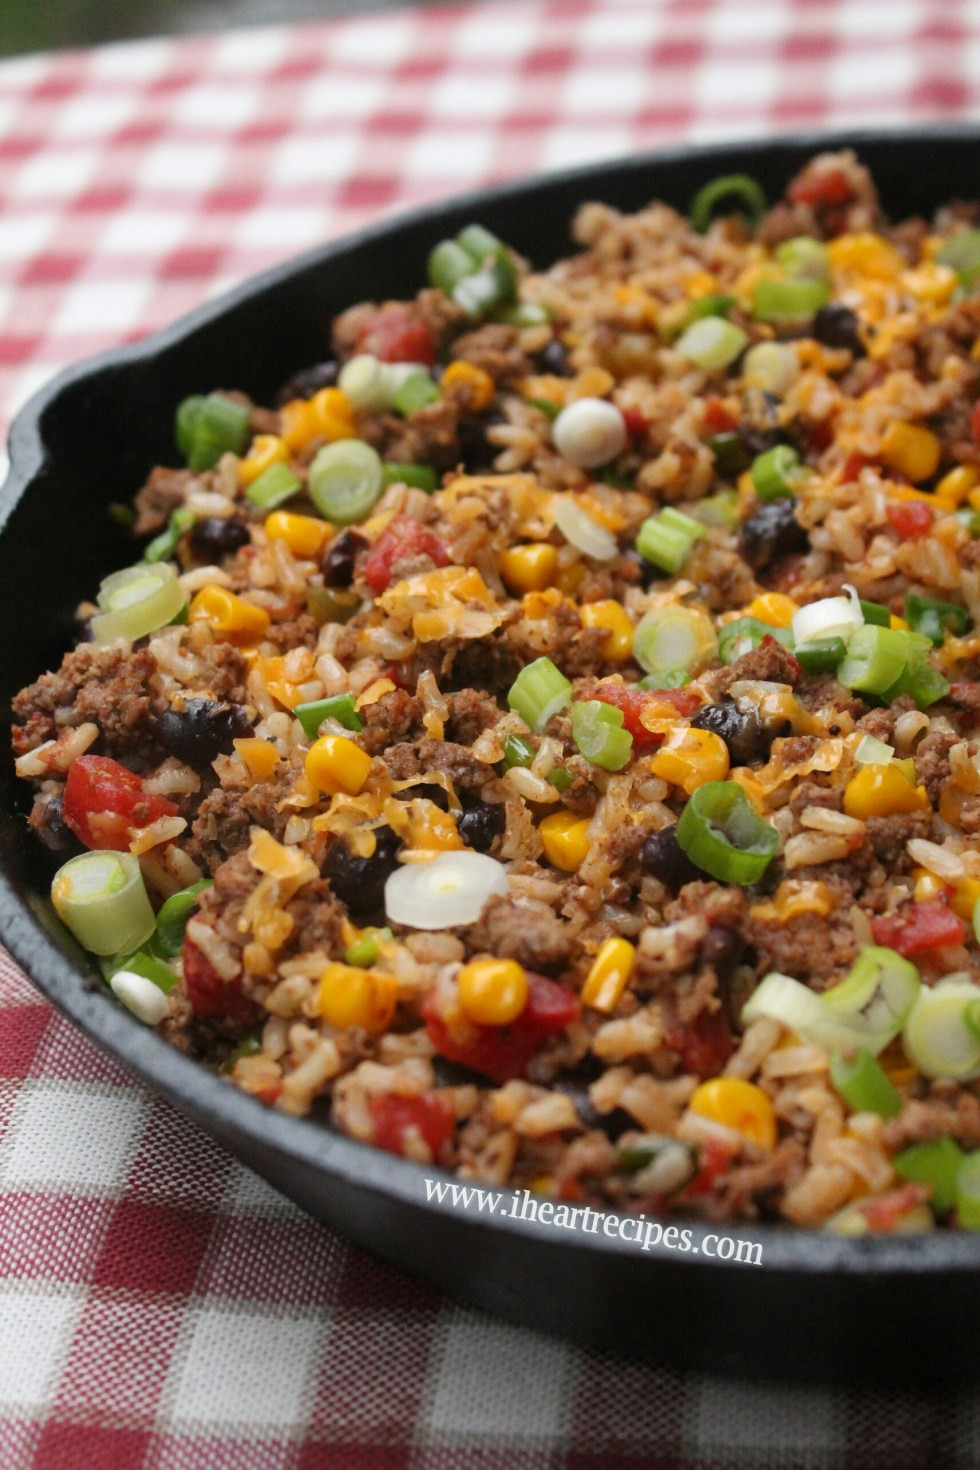 Low Fat Recipes With Ground Beef
 Tex Mex Ground Beef Skillet